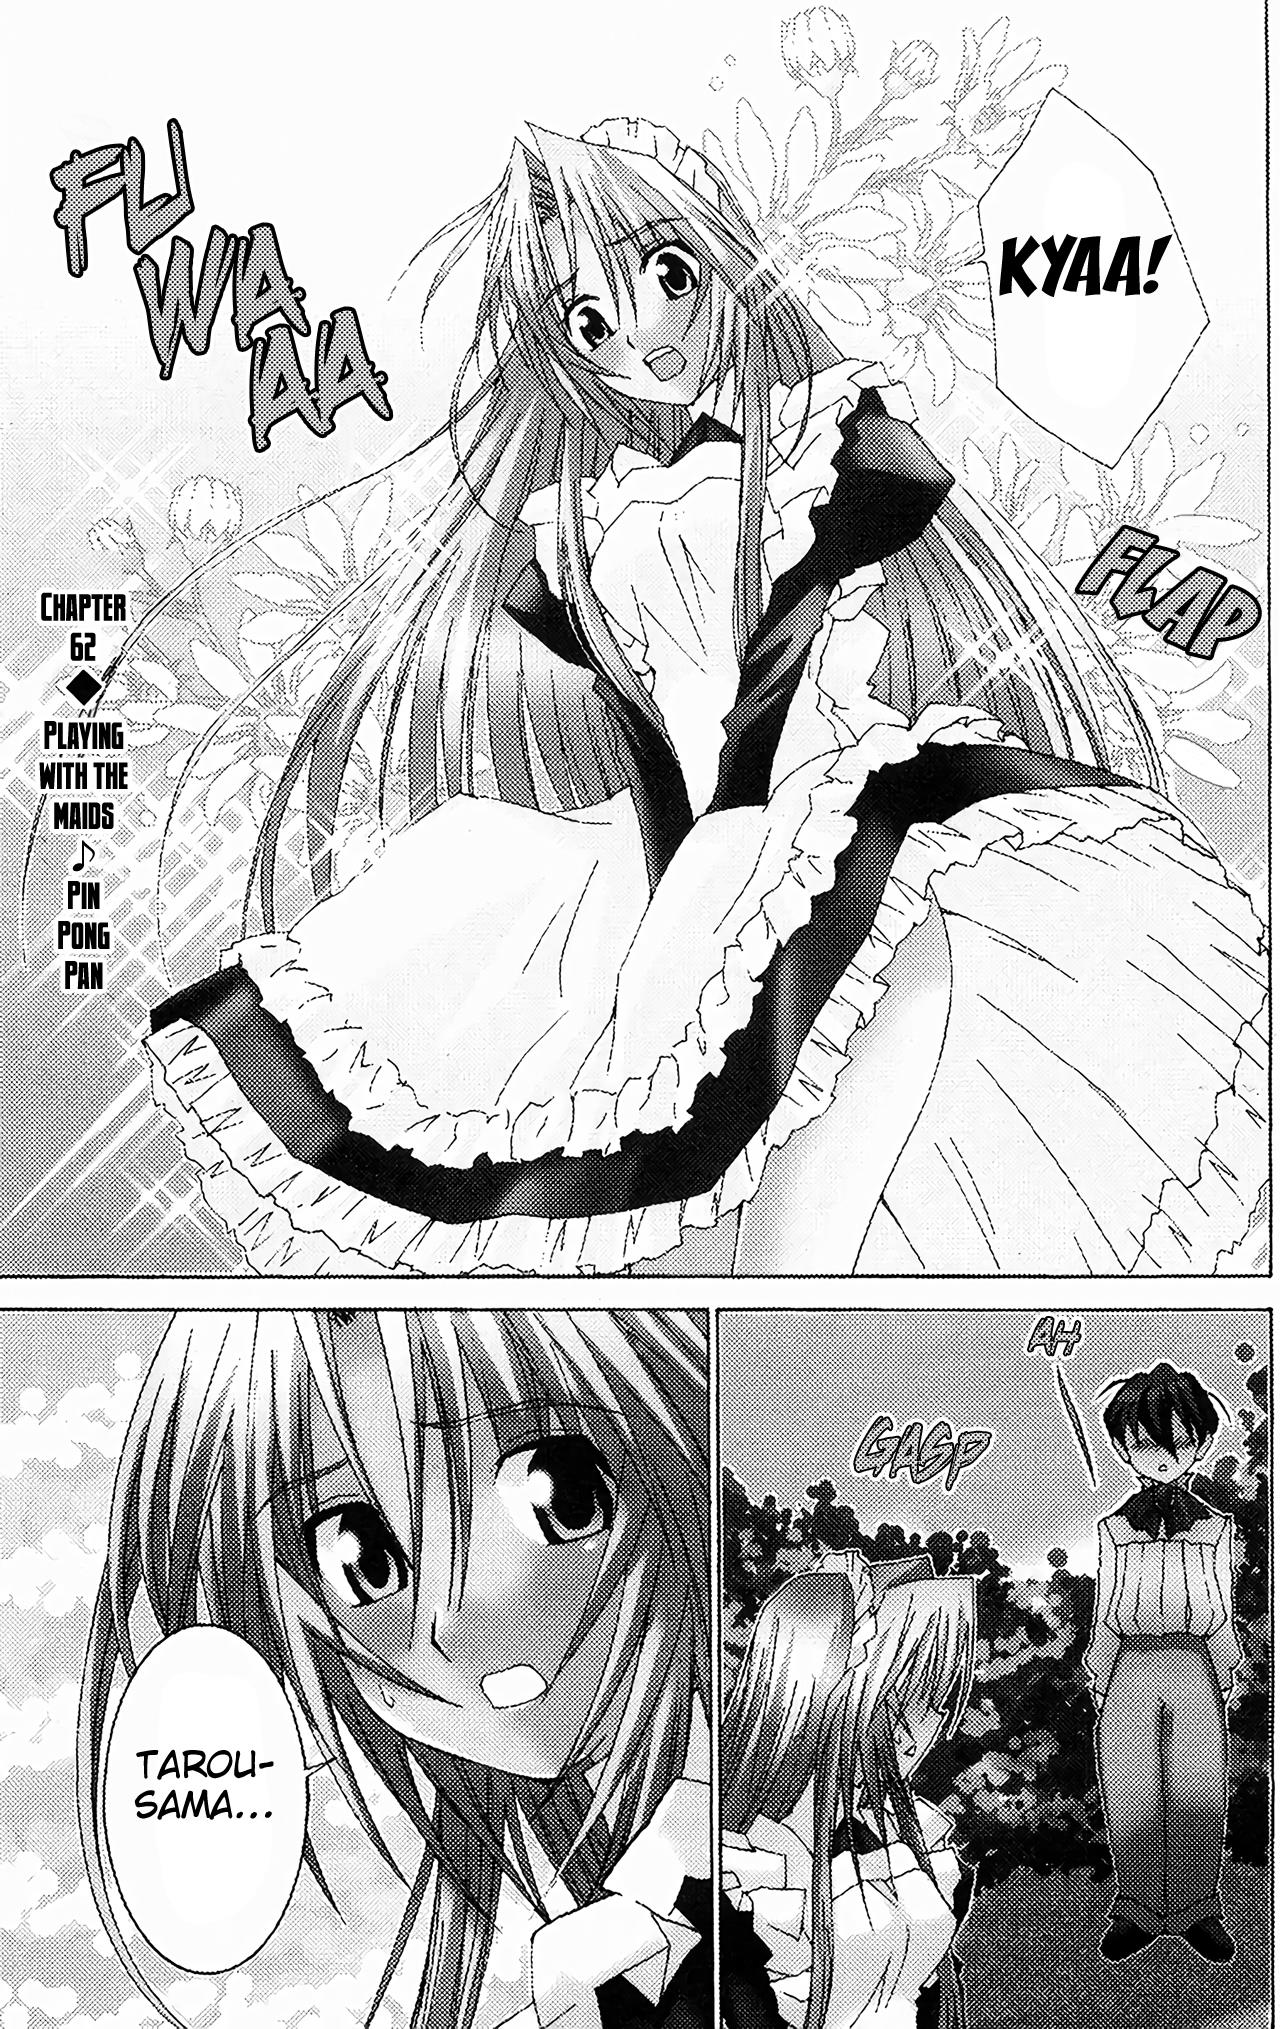 Hanaukyo Maid Tai Vol.10 Chapter 62: Playing With The Maids ♪ Pin Pong Pan - Picture 2